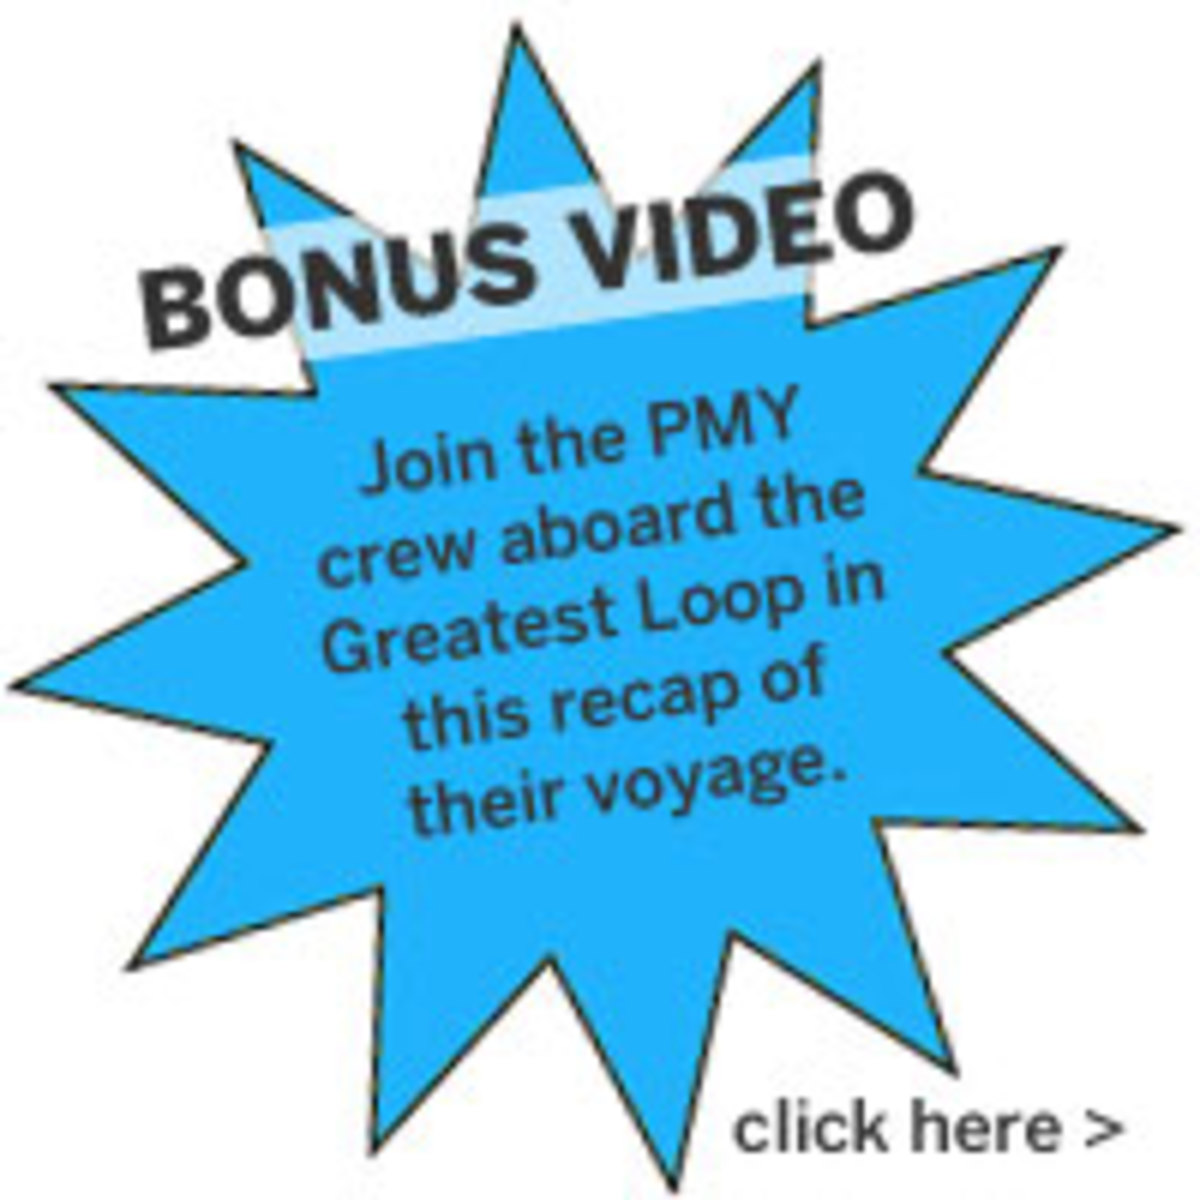 Join the Power & Motoryacht crew aboard the Greatest Loop in this recap of their voyage. 